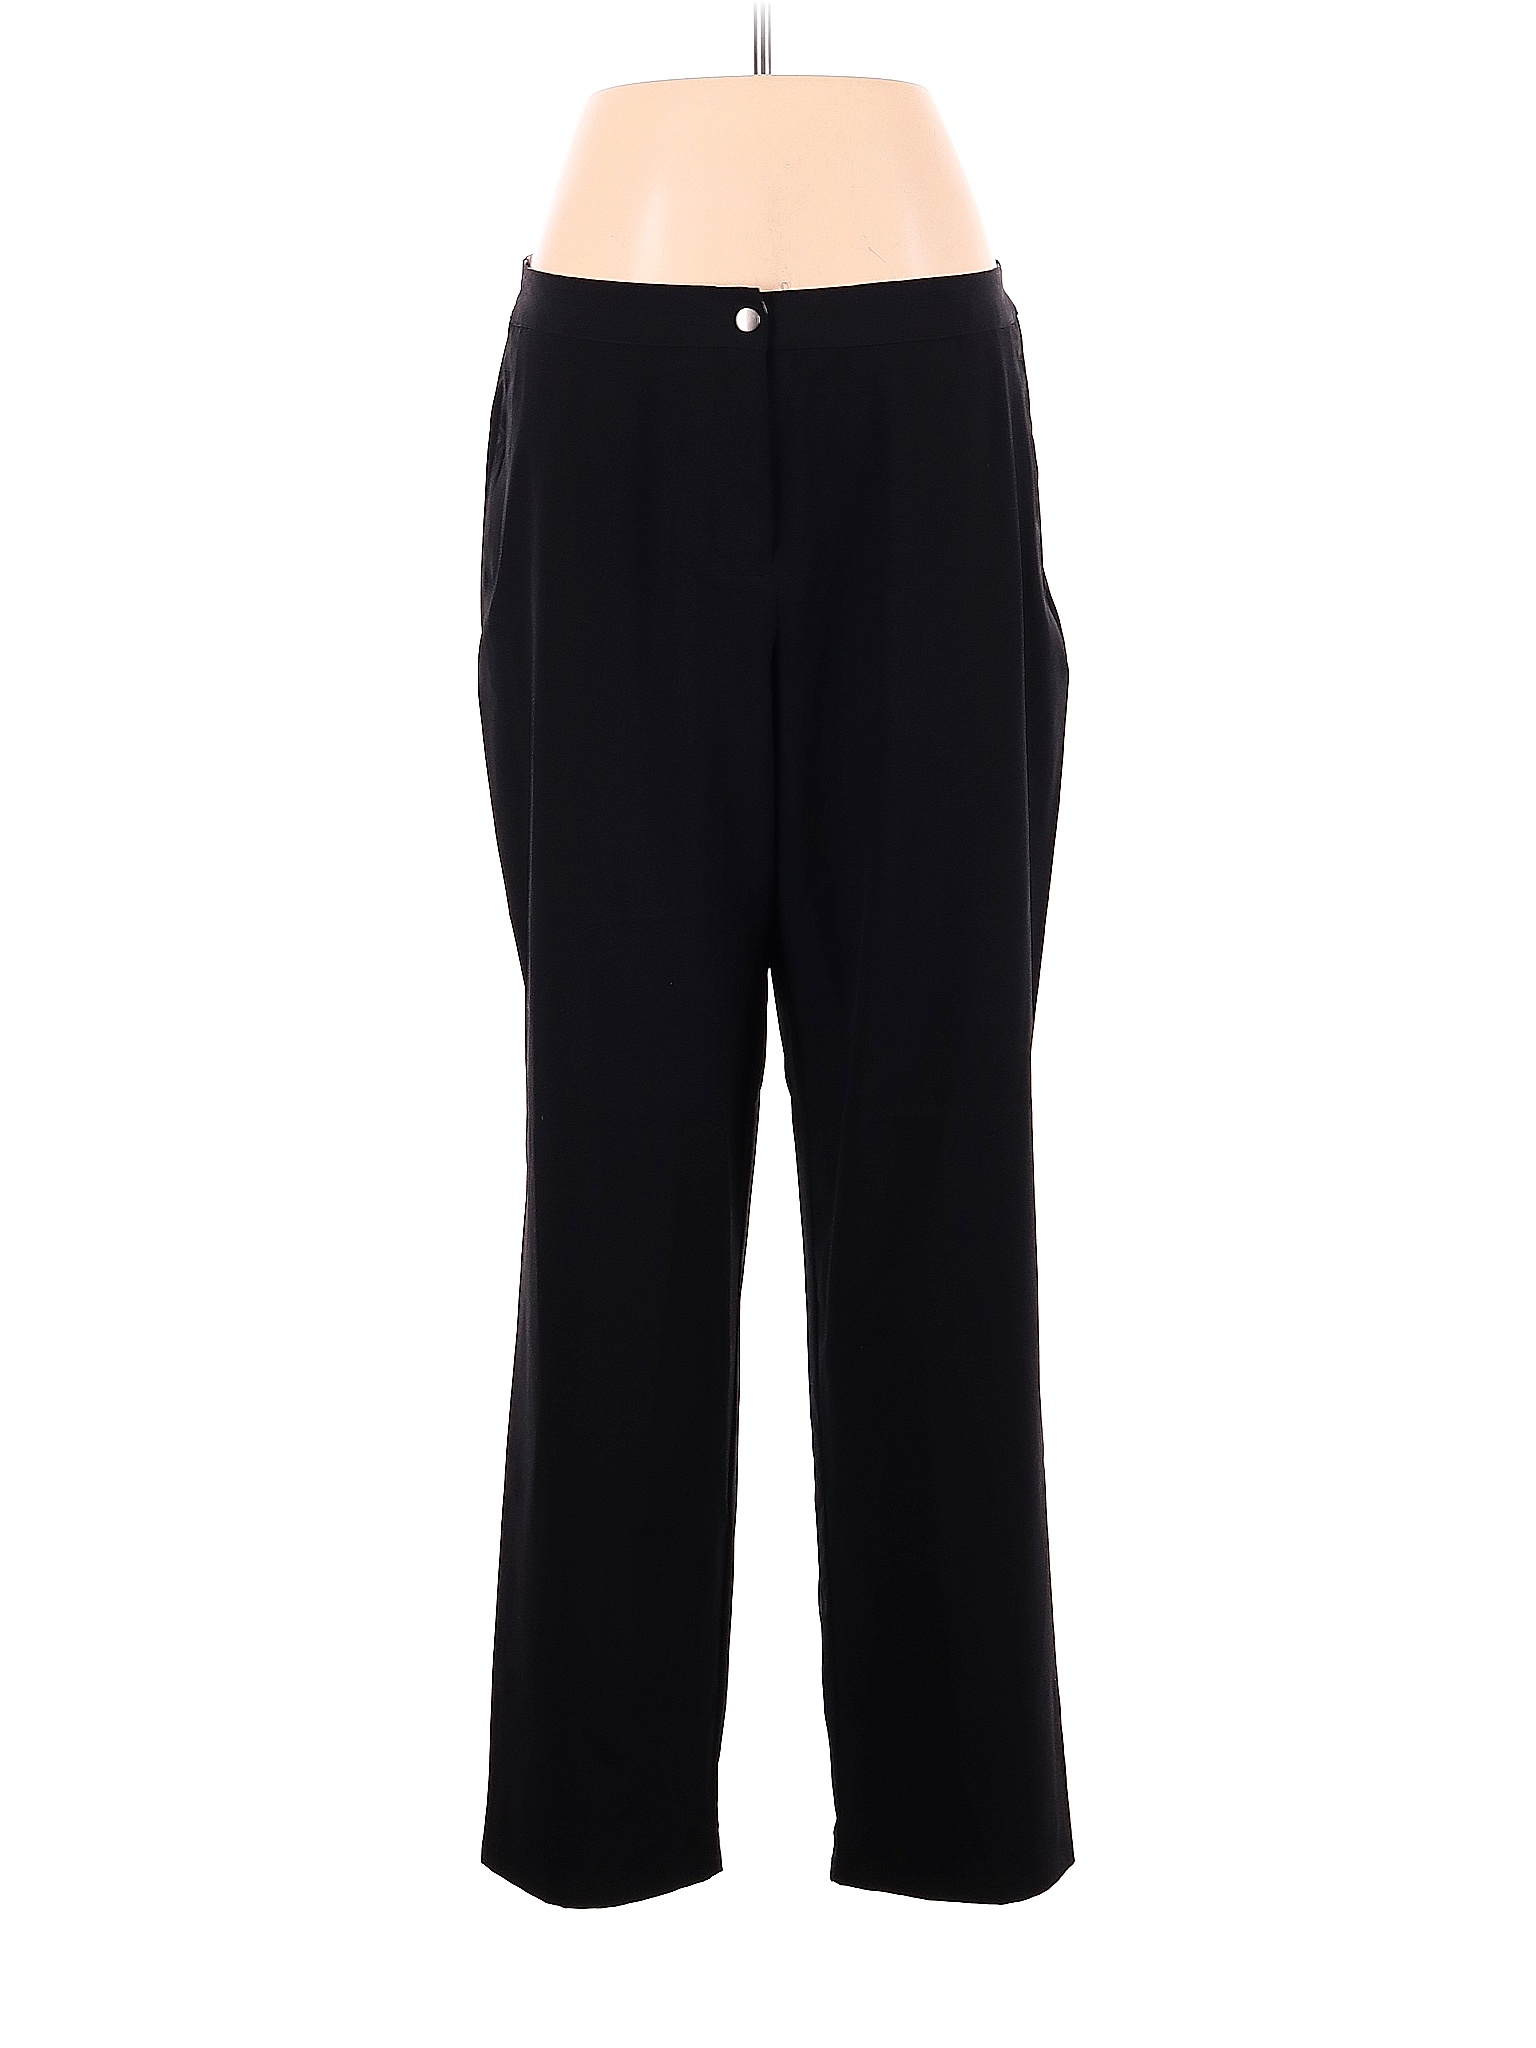 Zenergy by Chico's Solid Black Casual Pants Size Lg (2) - 81% off | thredUP